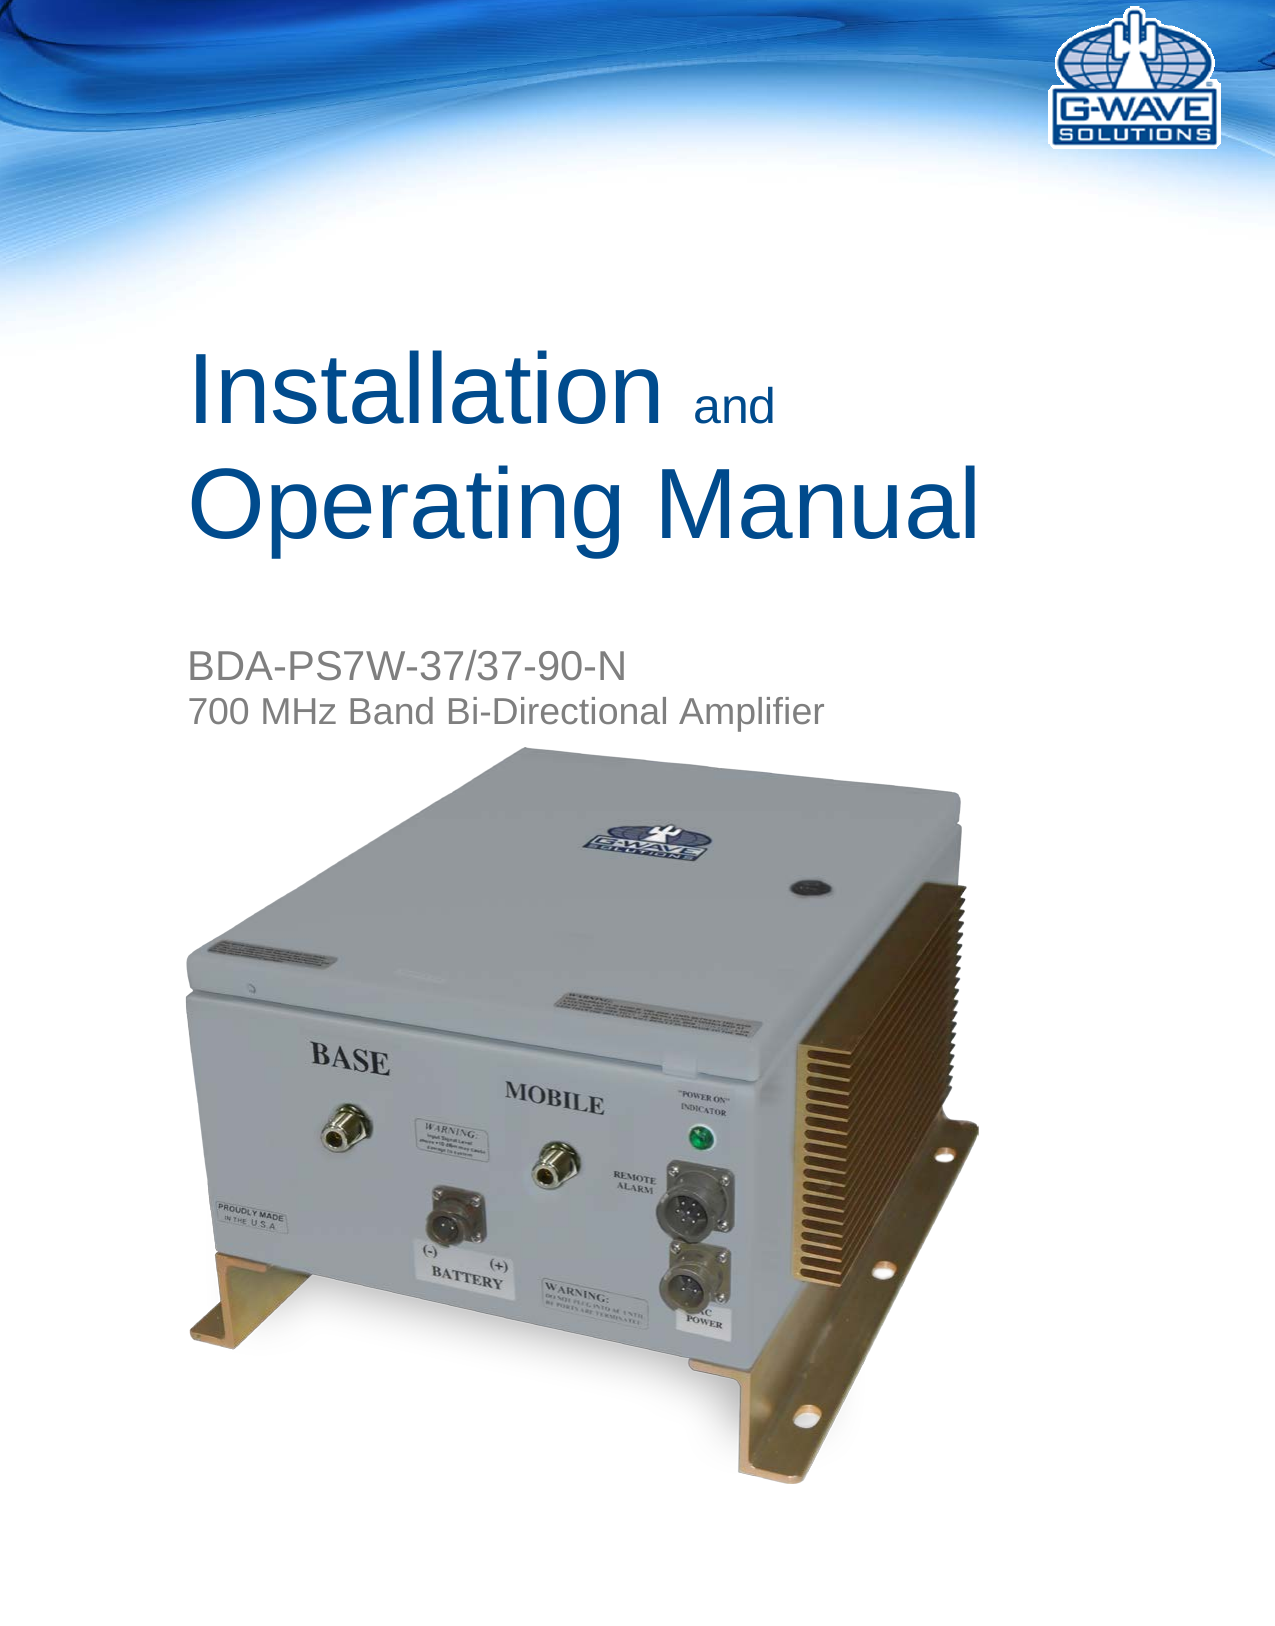       Installation and Operating Manual    BDA-PS7W-37/37-90-N 700 MHz Band Bi-Directional Amplifier    